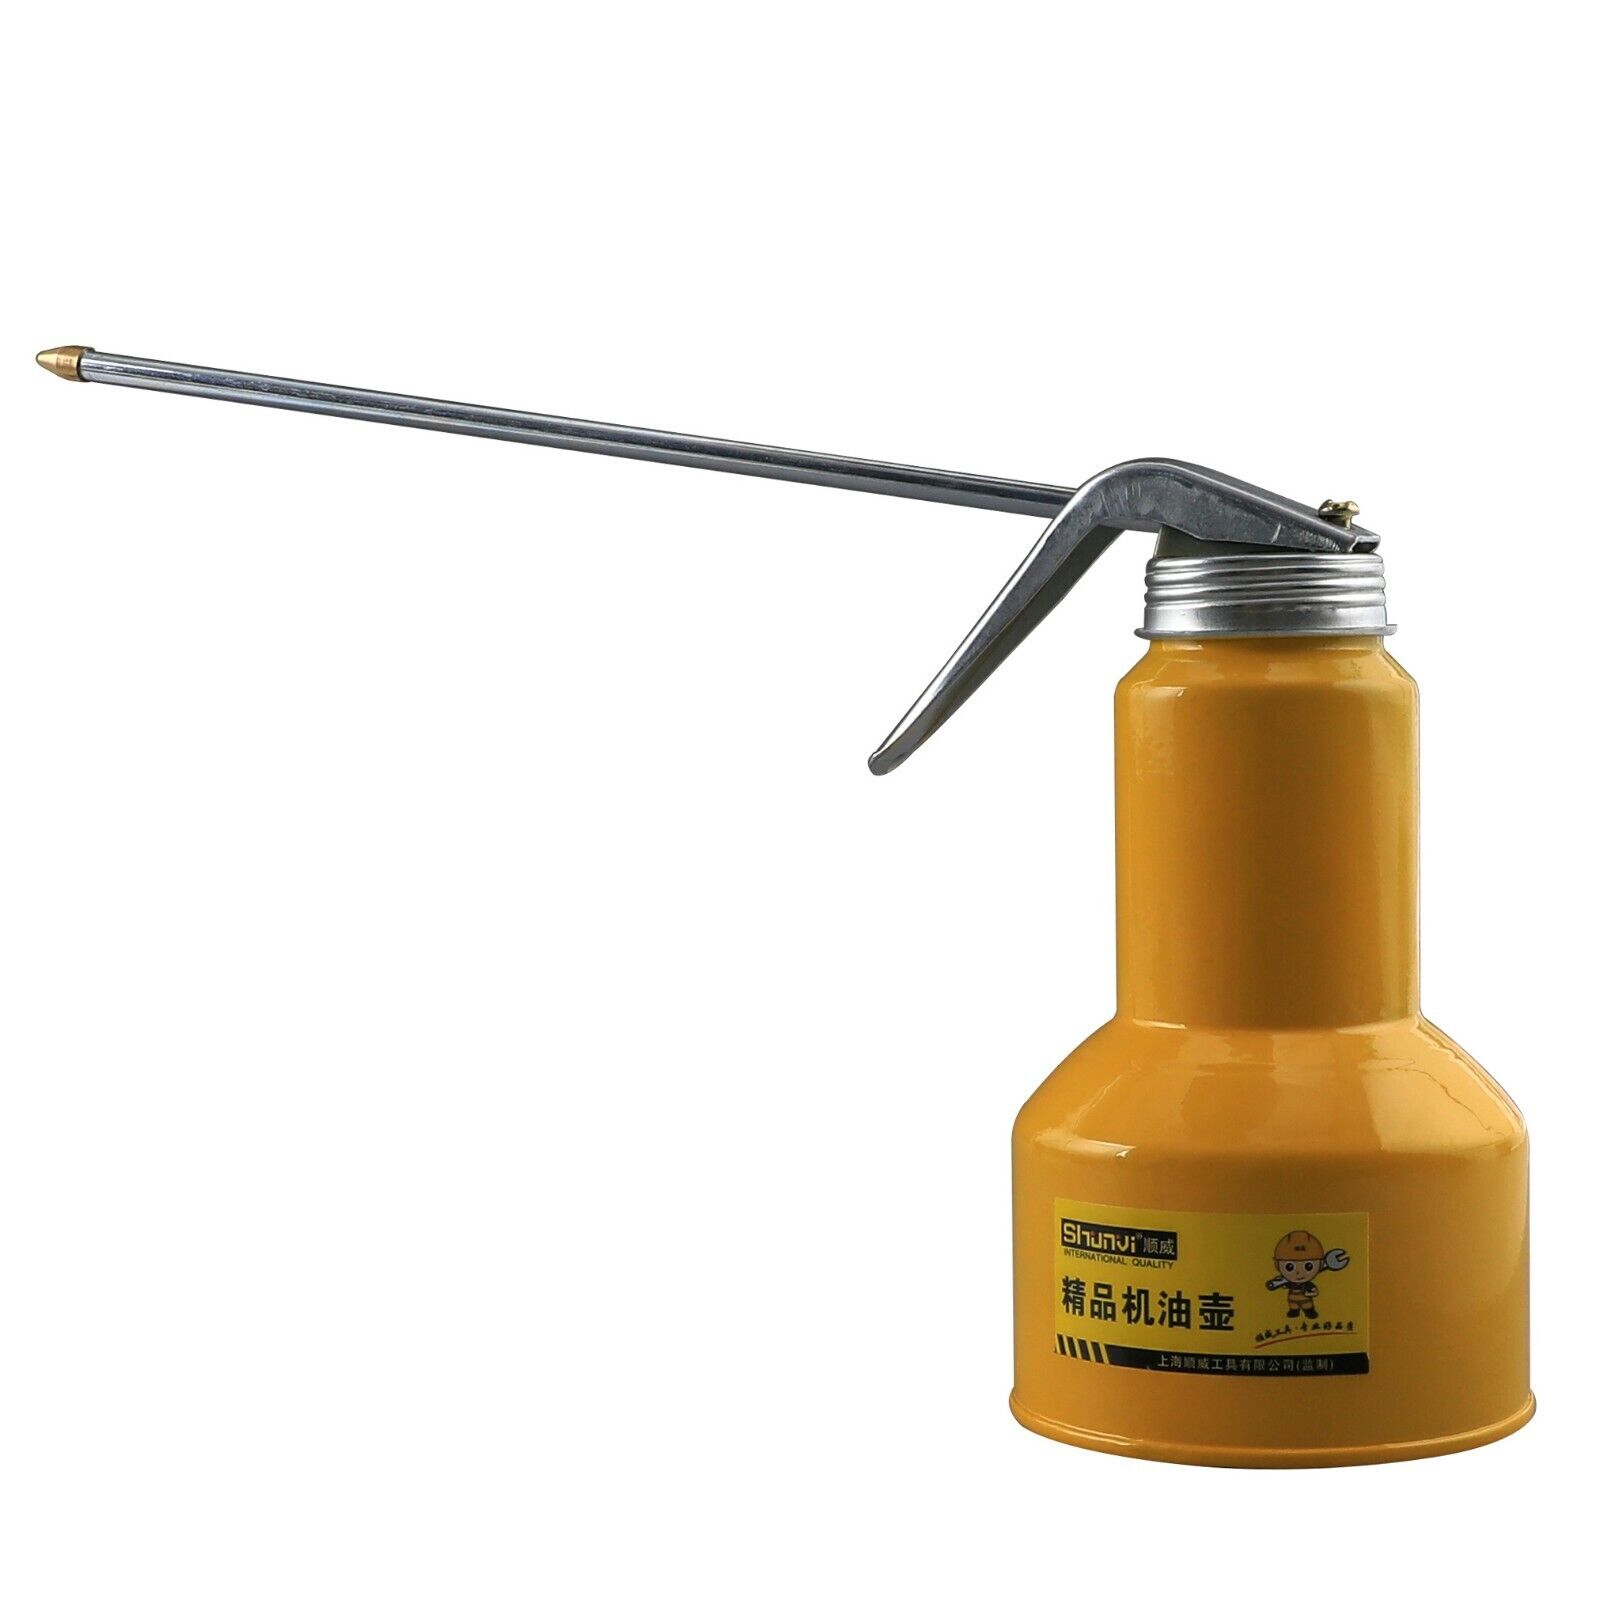 High Pressure Lubrication Feed Oil Can Spray Pot Pump Action Oiler Tool Auto